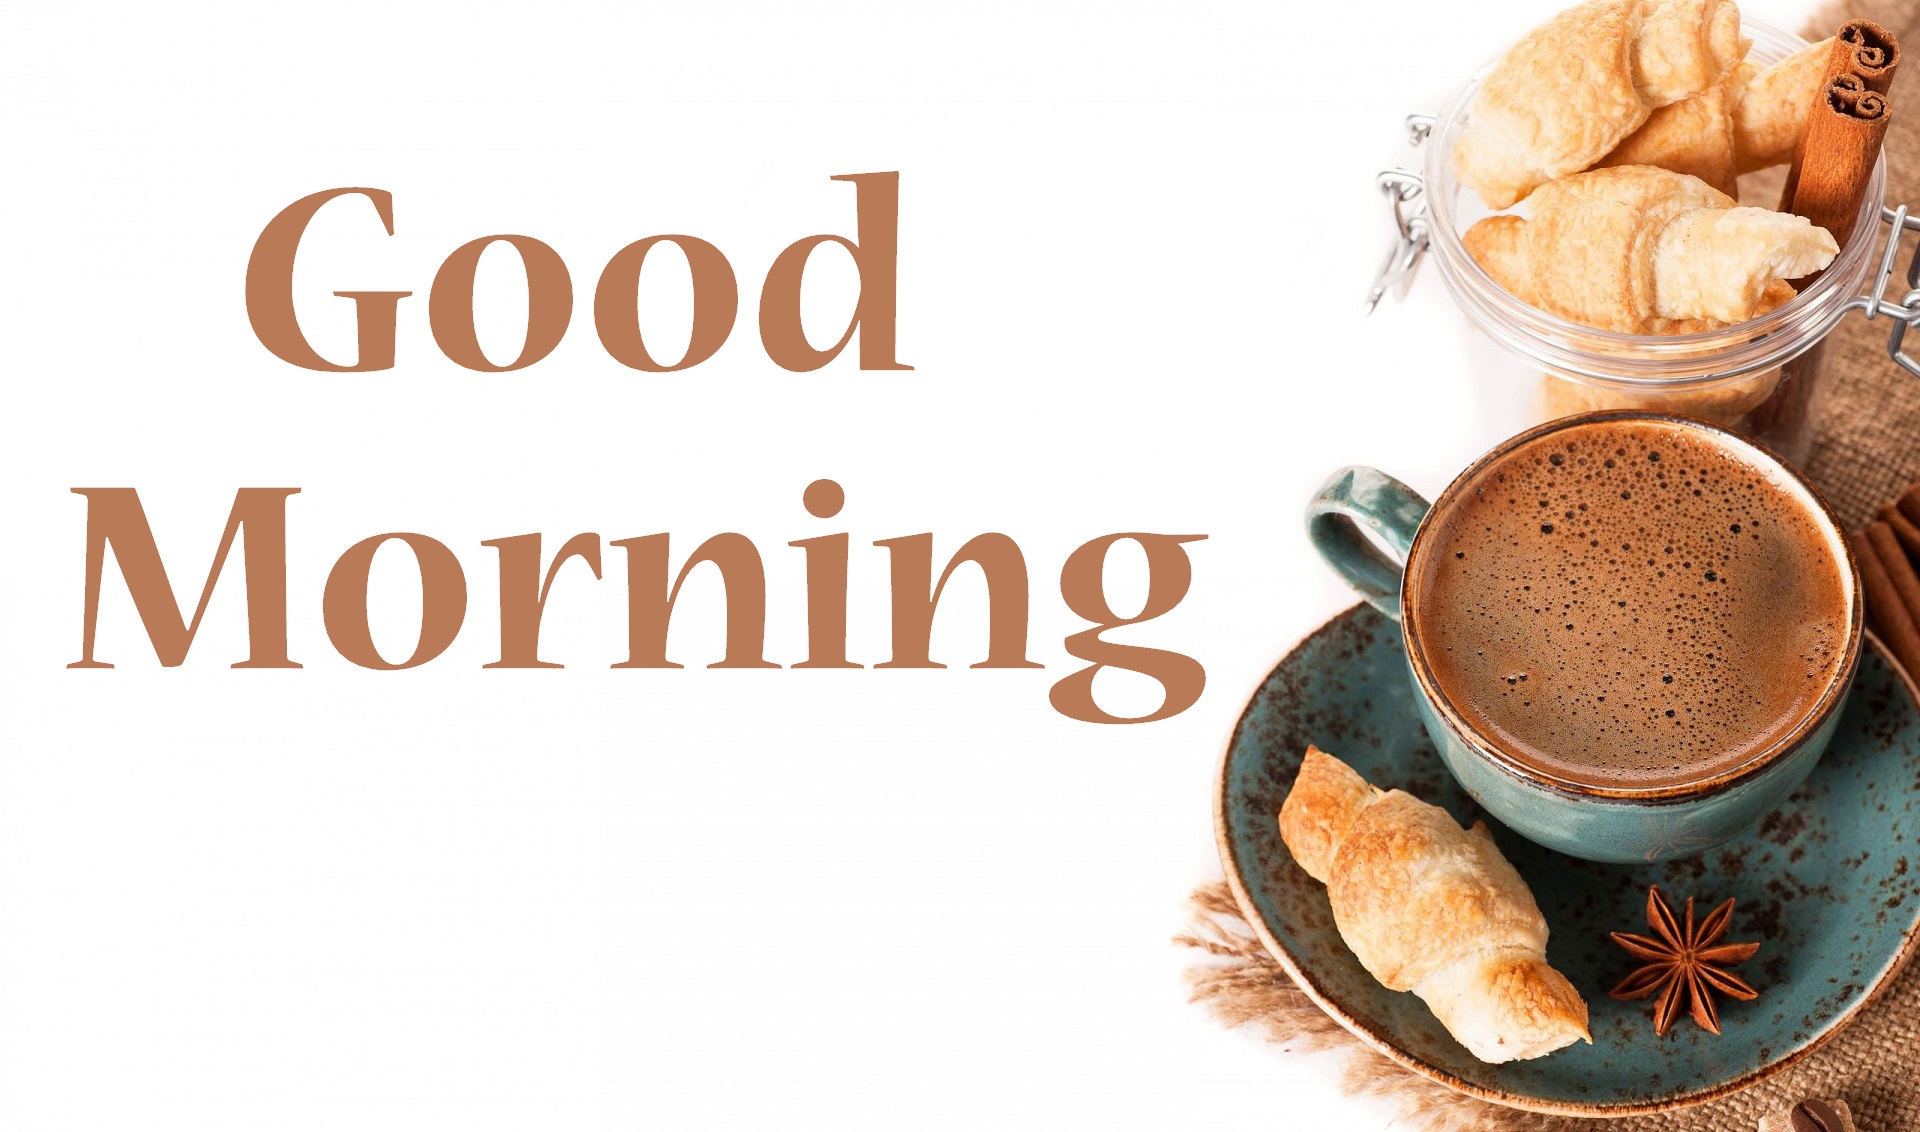 good morning images hd 2018